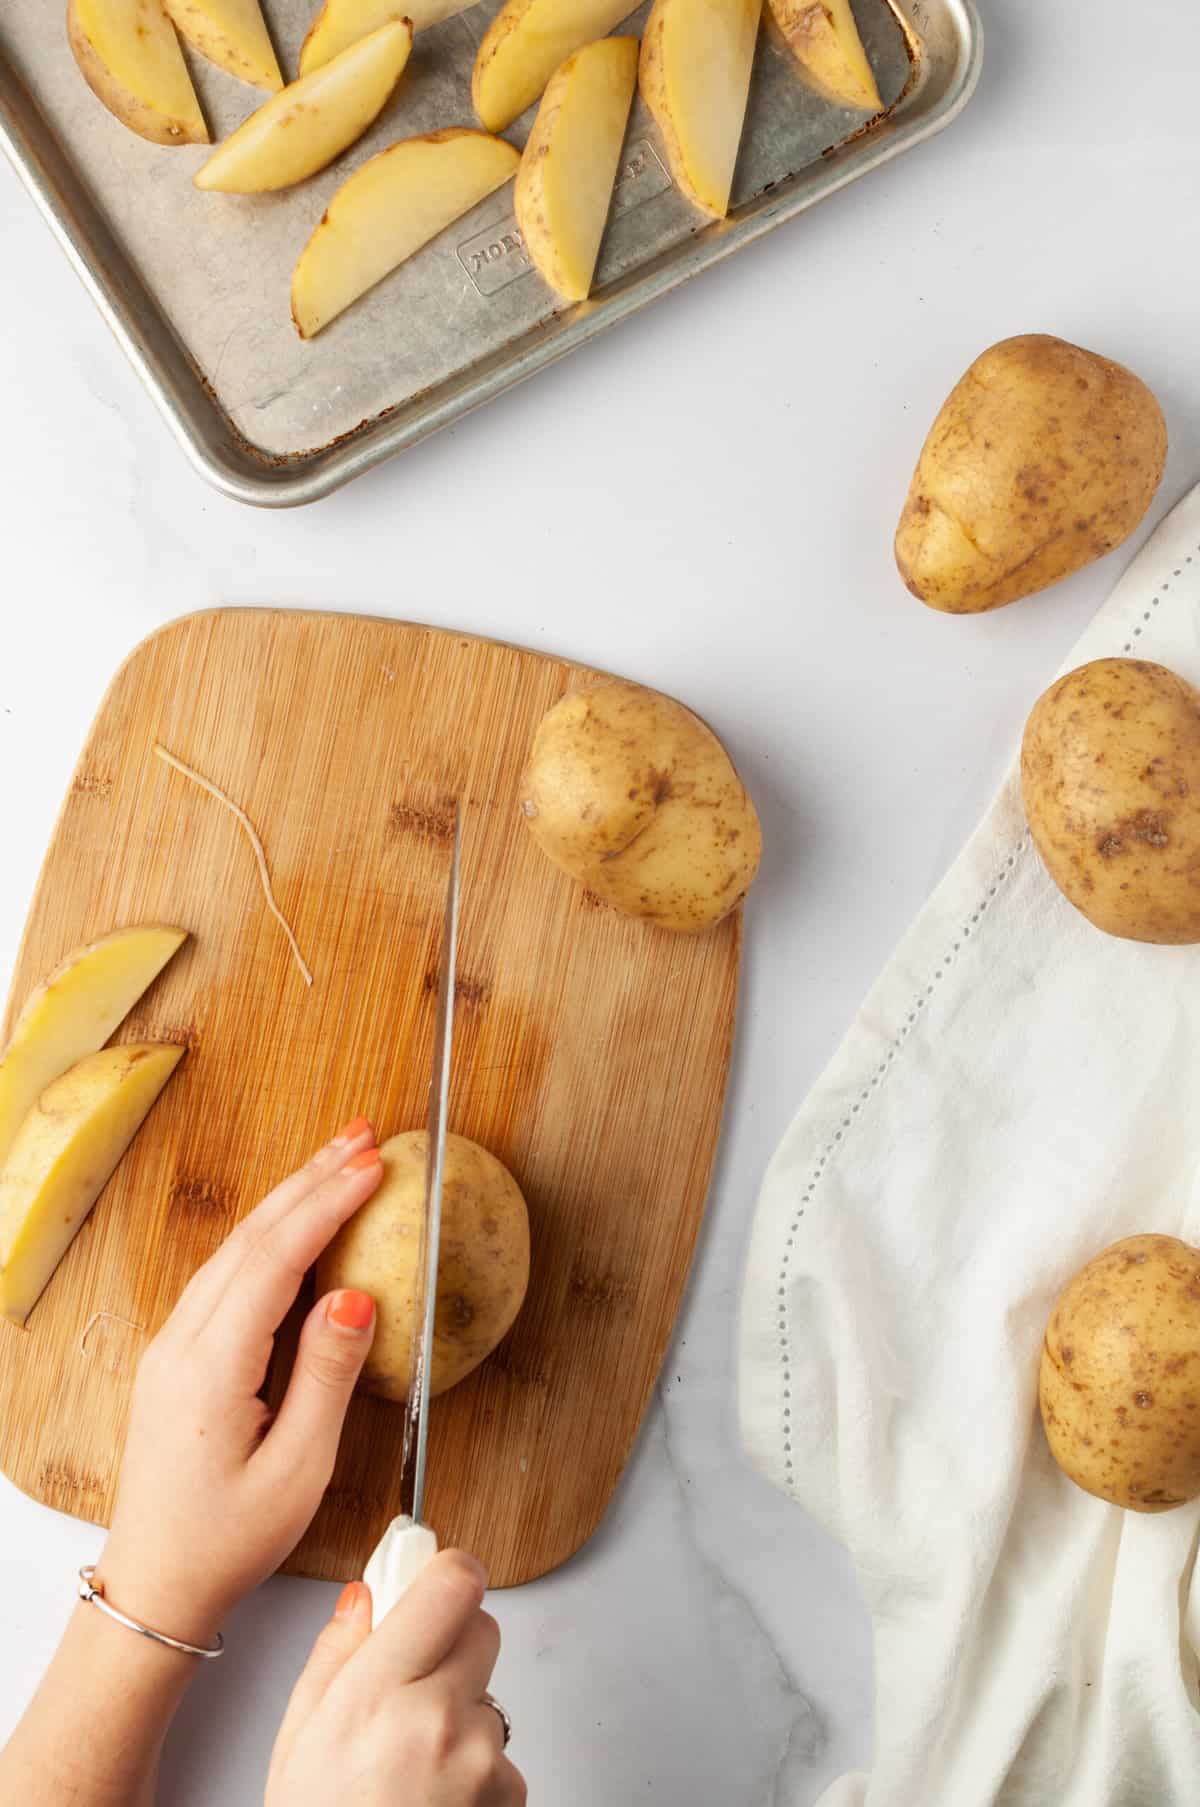 Cutting a potato in half with a chef's knife